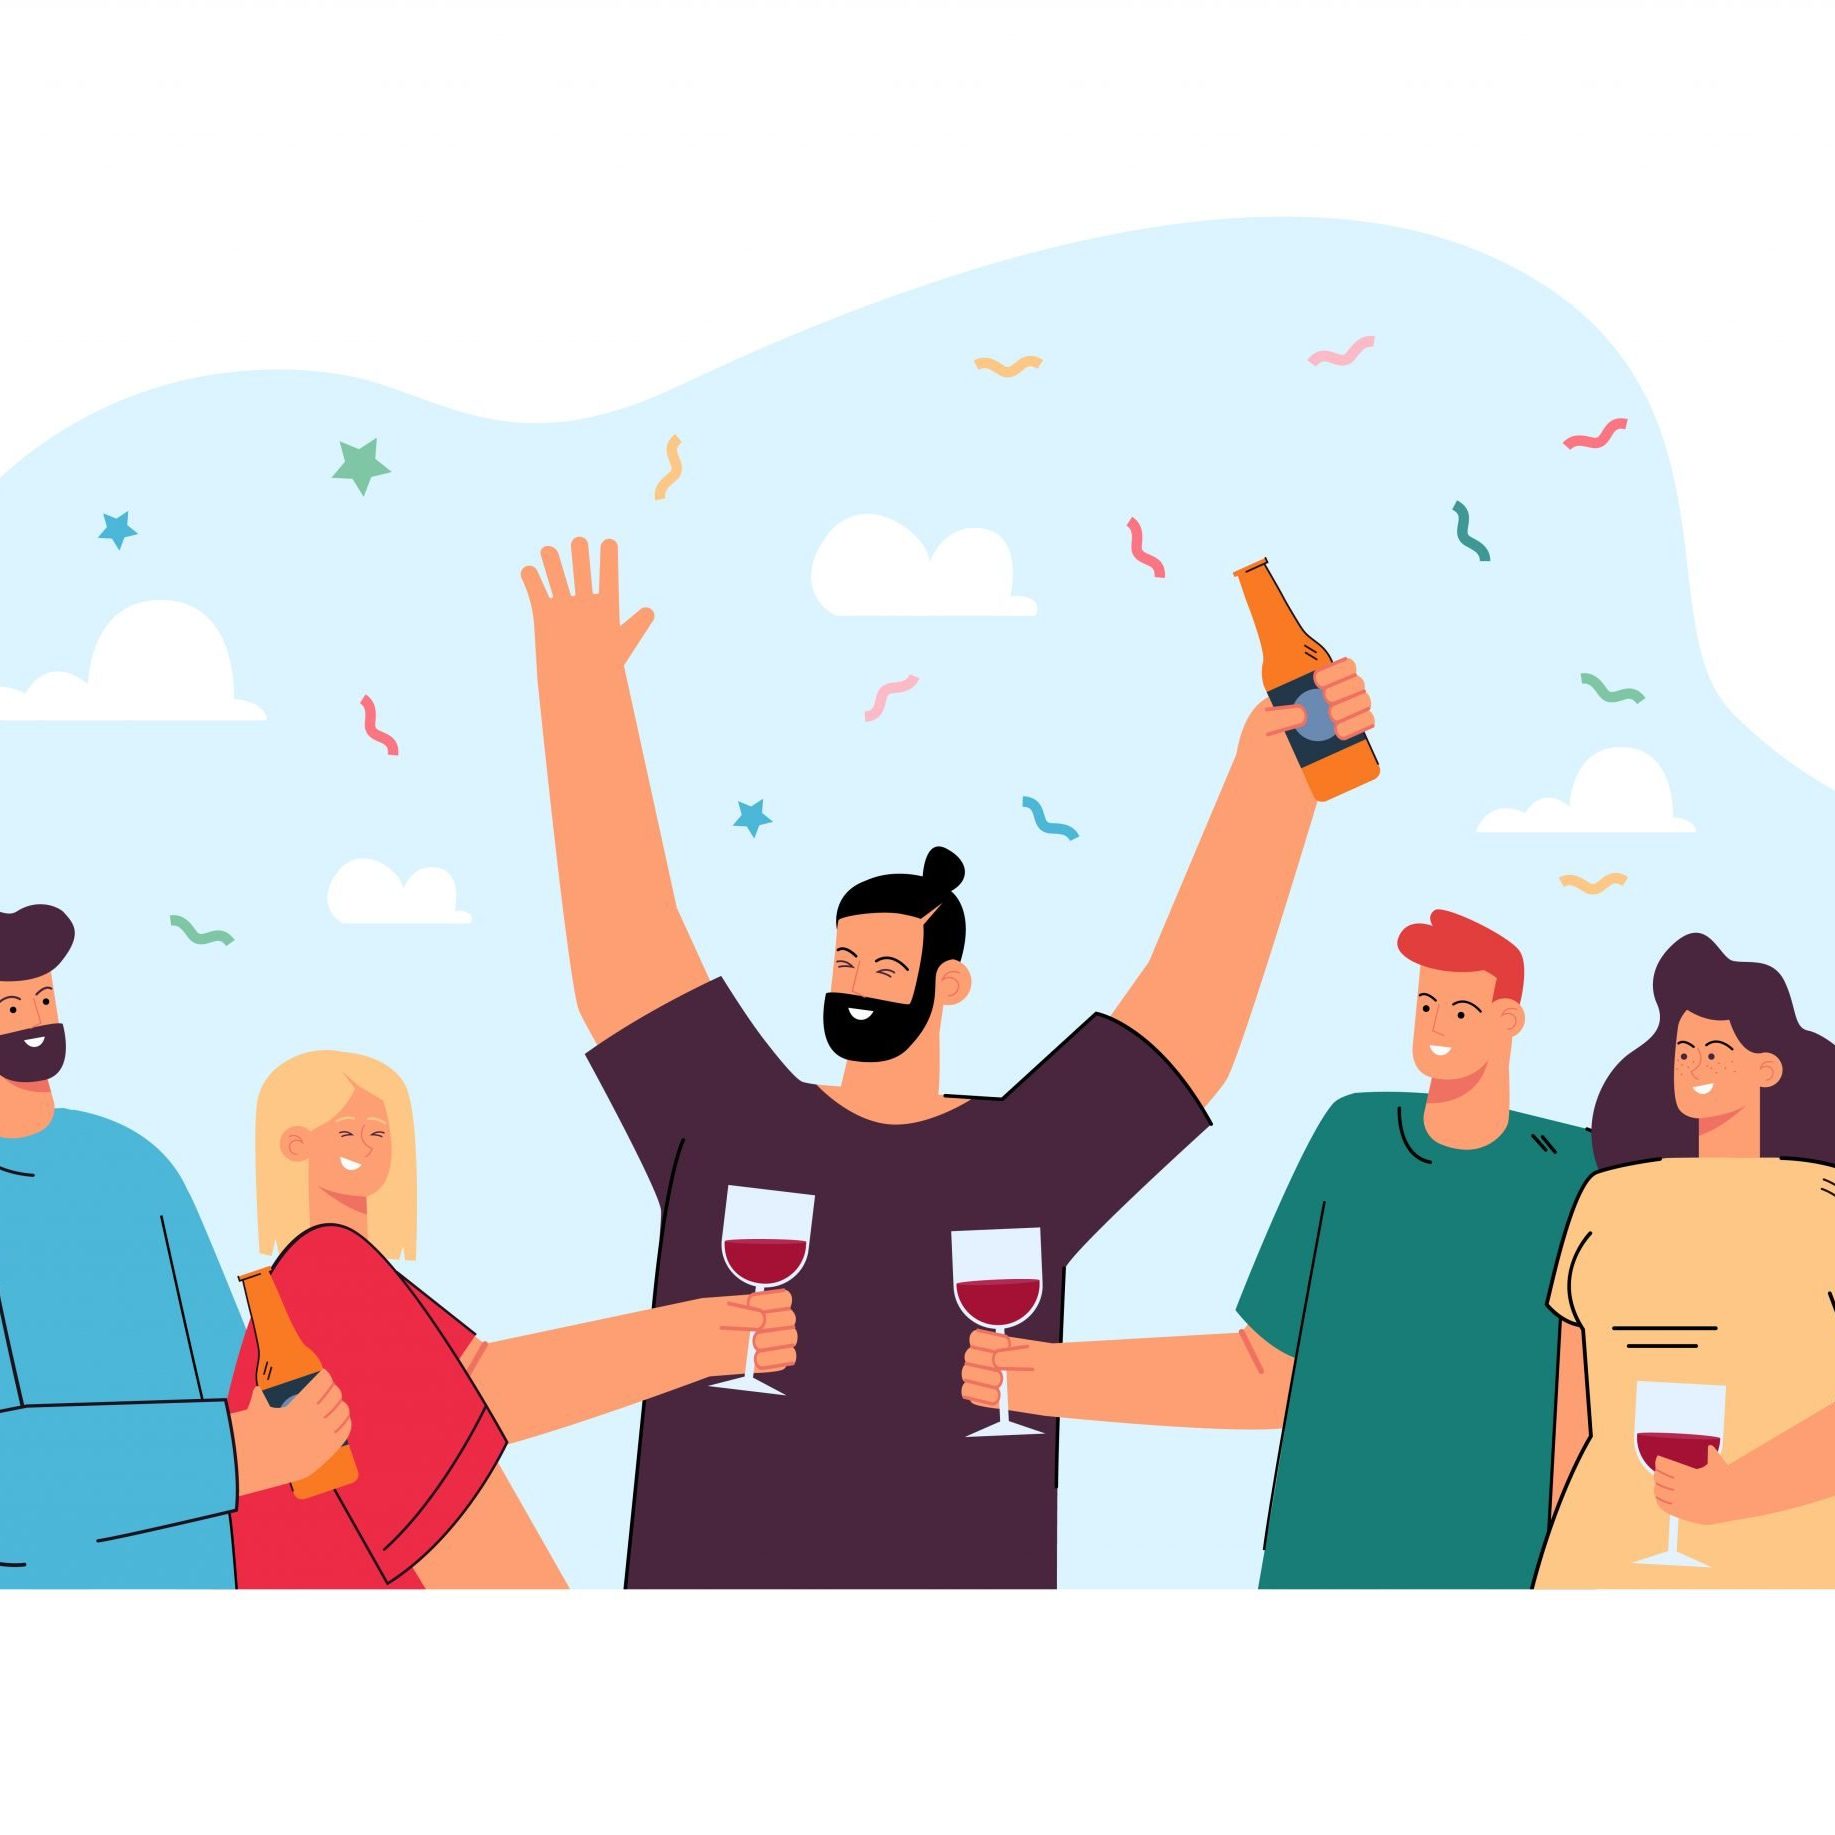 Happy friends drinking wine or beer together flat vector illustration. Cartoon positive people clinking glasses with alcohol drinks, smiling and making toasts. Friendship and party celebration concept